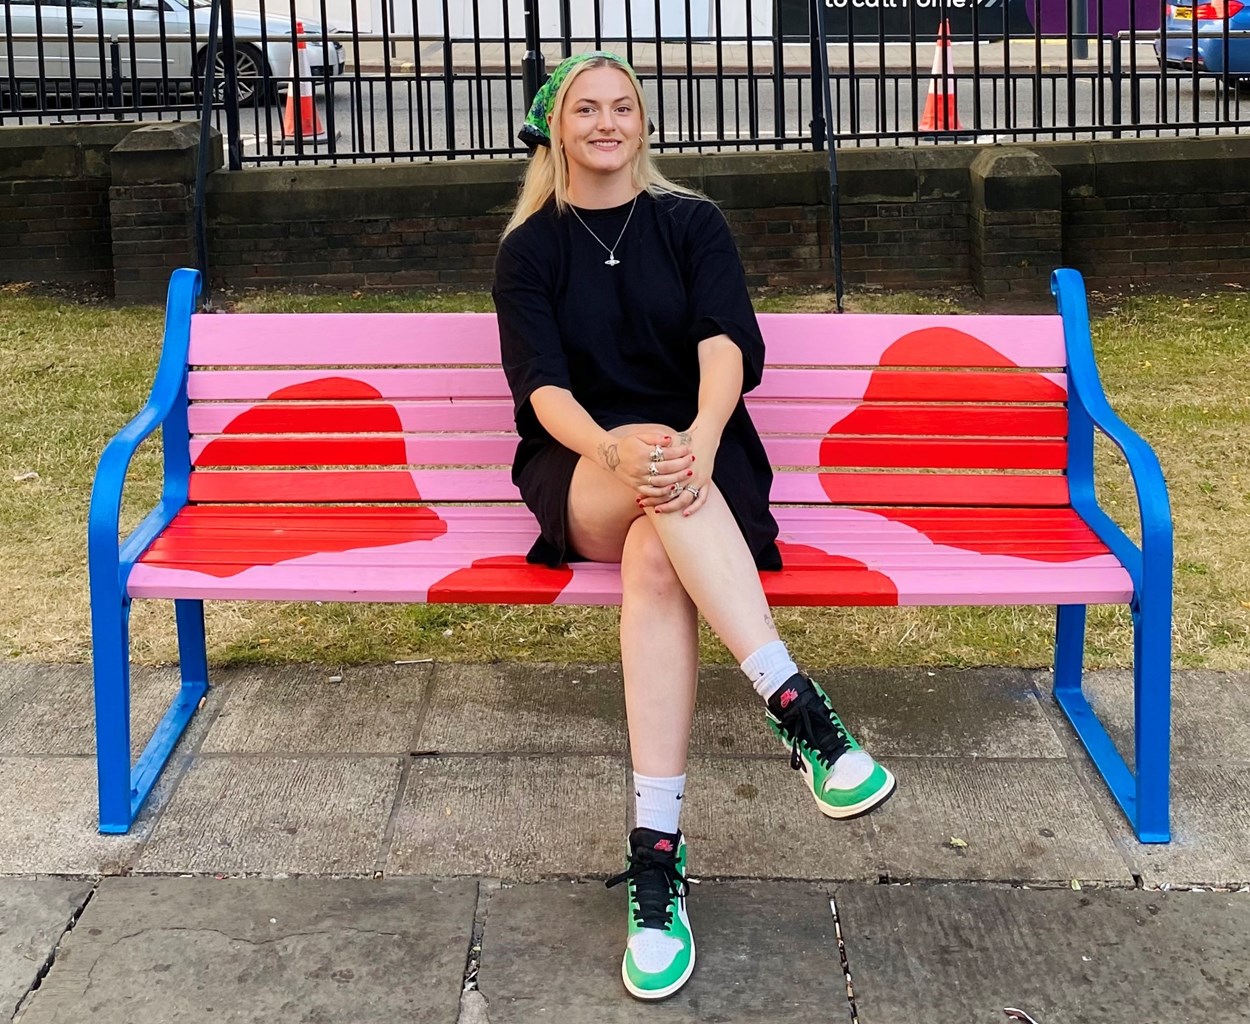 Merrion Gardens 5: Melody Sutherland with one of the repainted benches in Merrion Gardens.